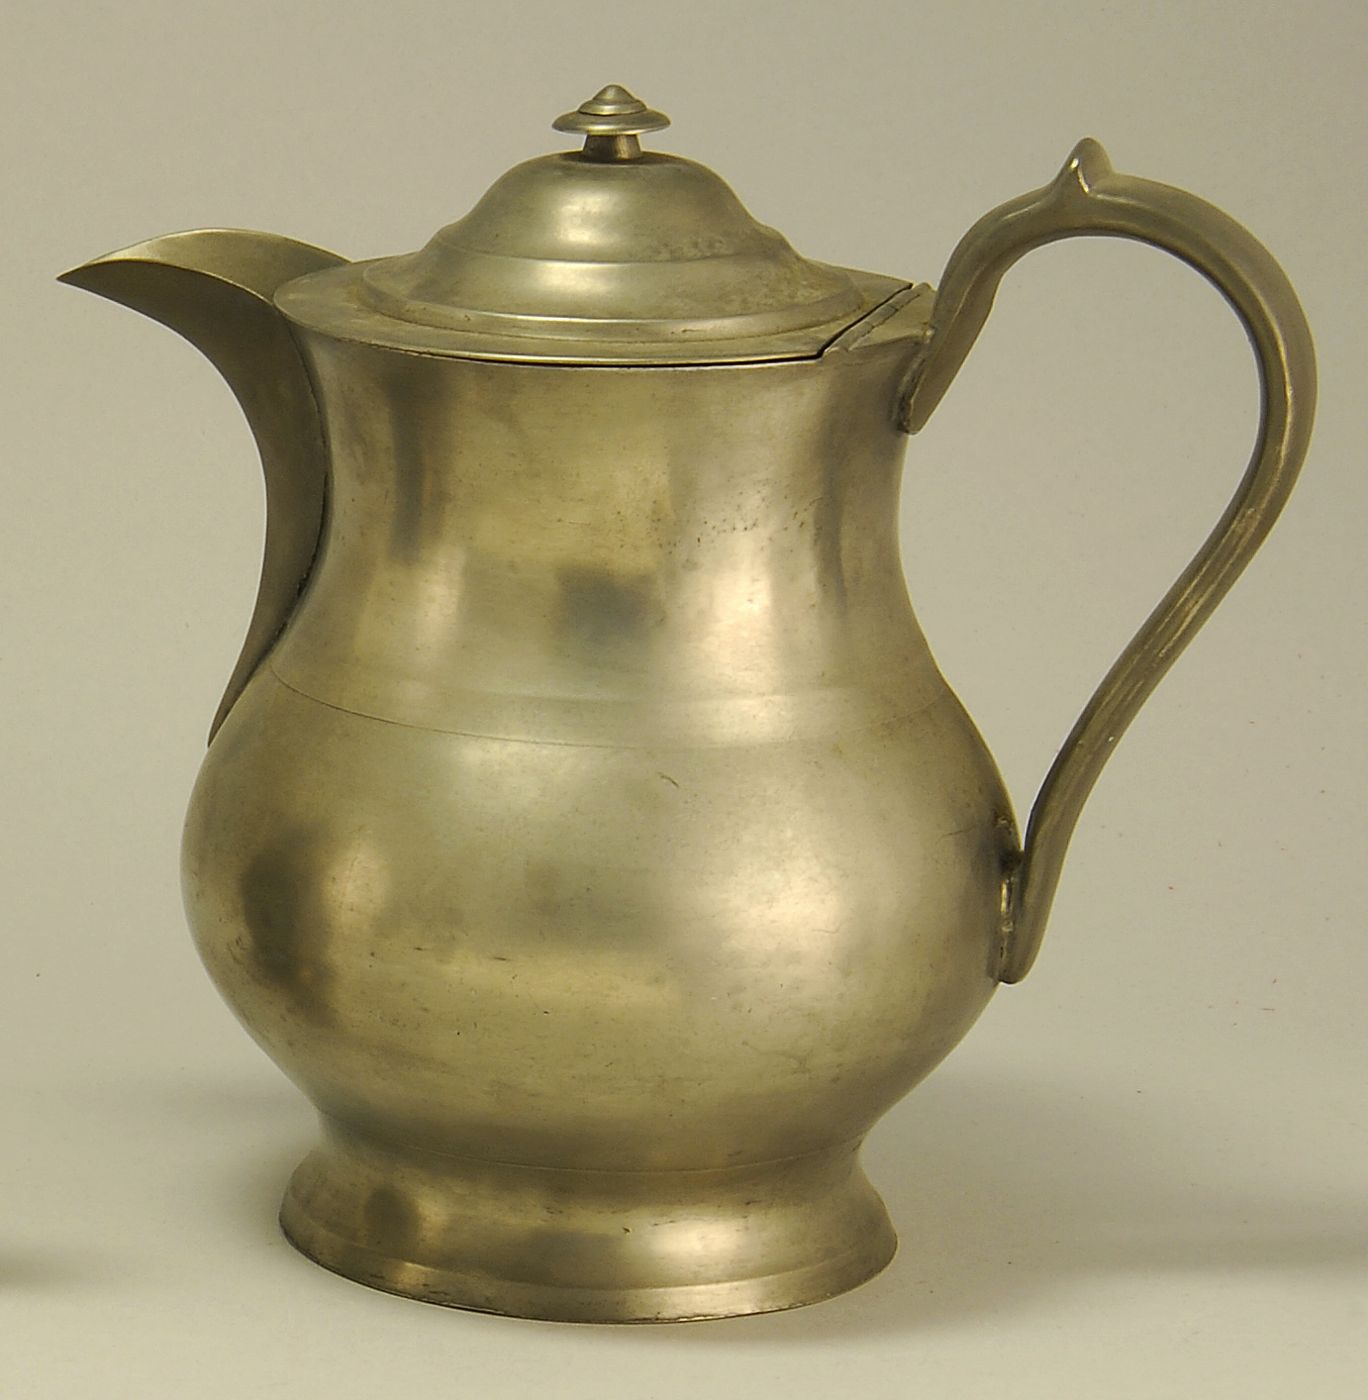 ANTIQUE AMERICAN PEWTER ONE-GALLON